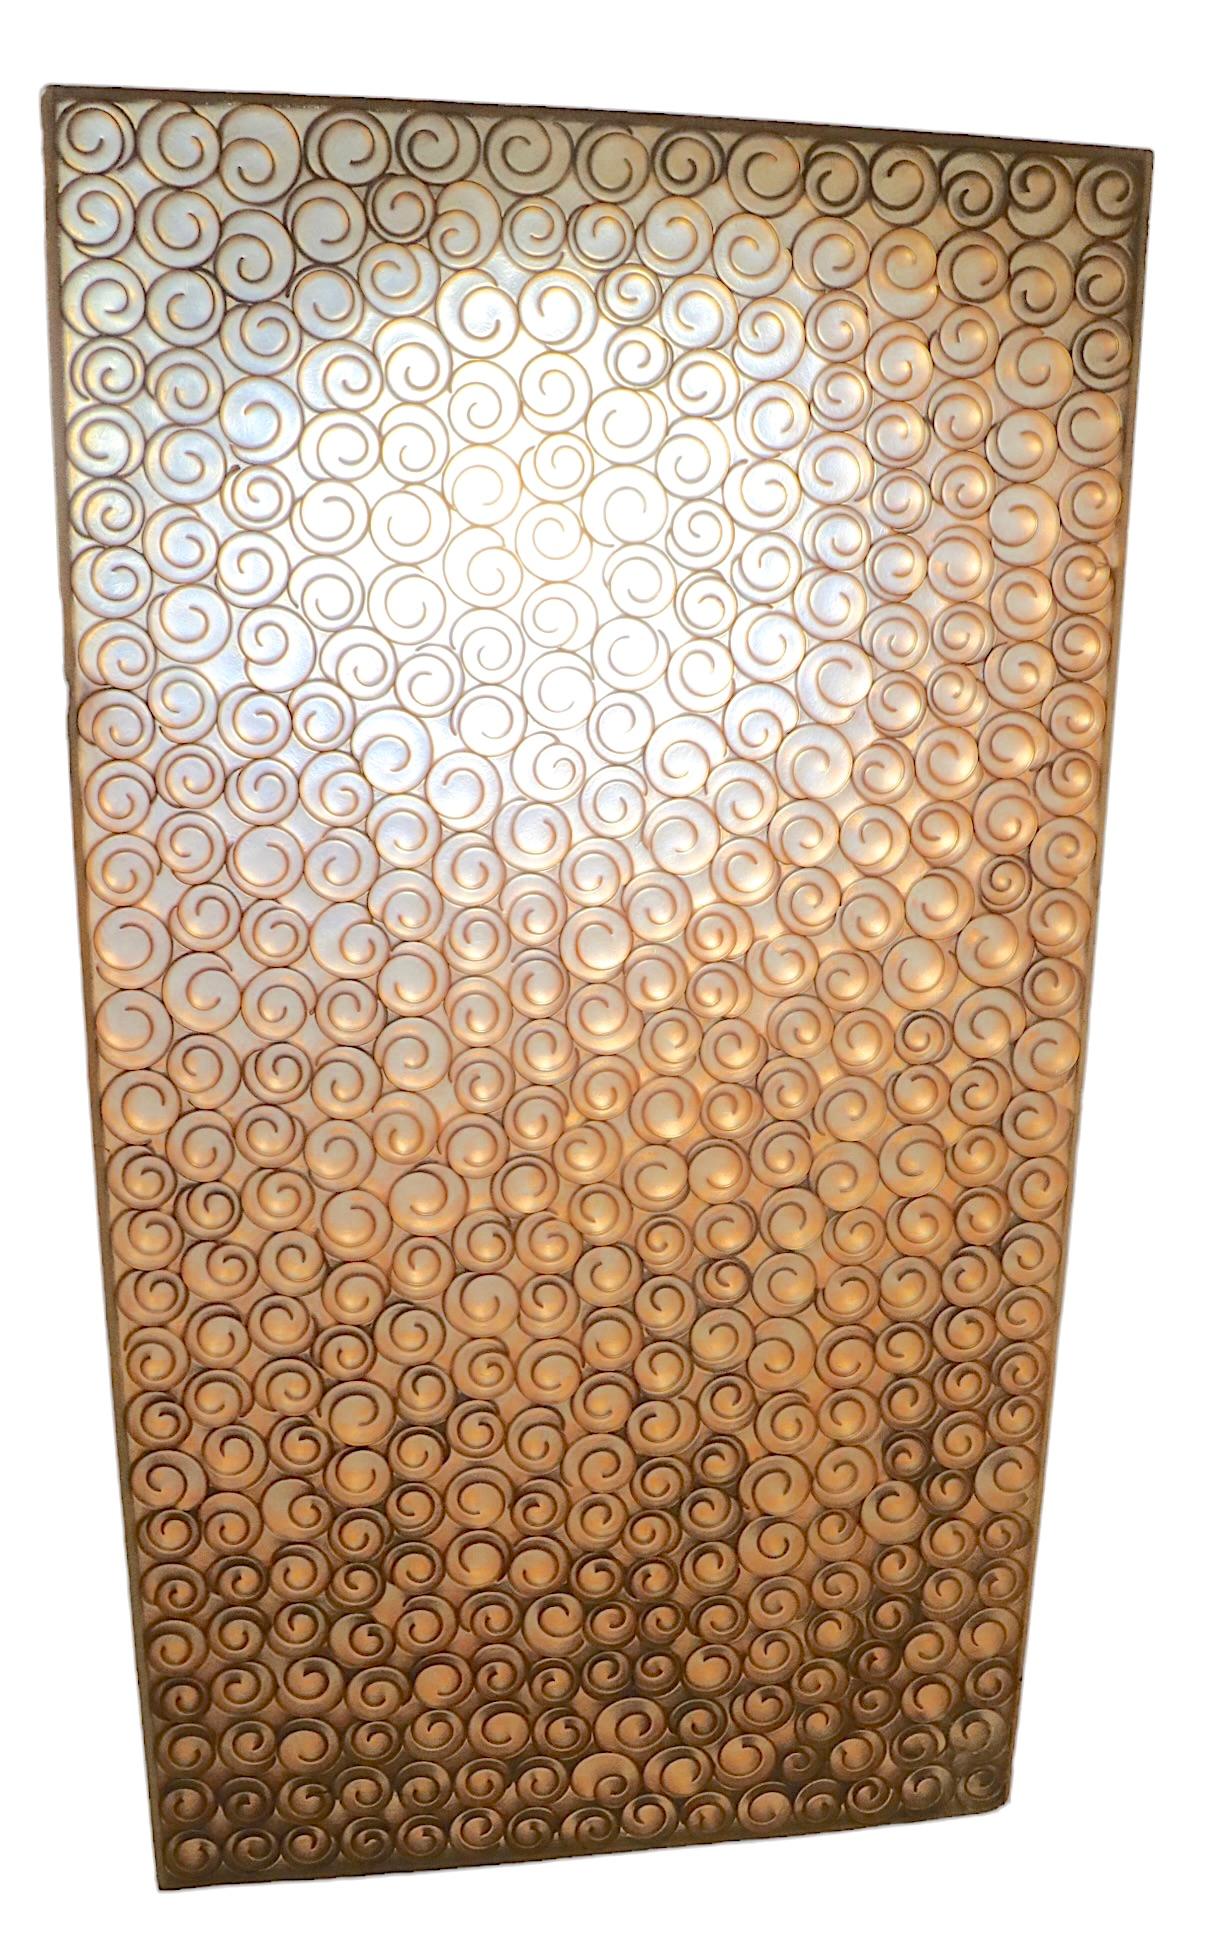 Groovy architectural panel constructed of translucent plastic with embedded wood curlicue elements repeating throughout. I believe this panel was originally a room divider, or some sort of decorative architectural element. This piece is in good,